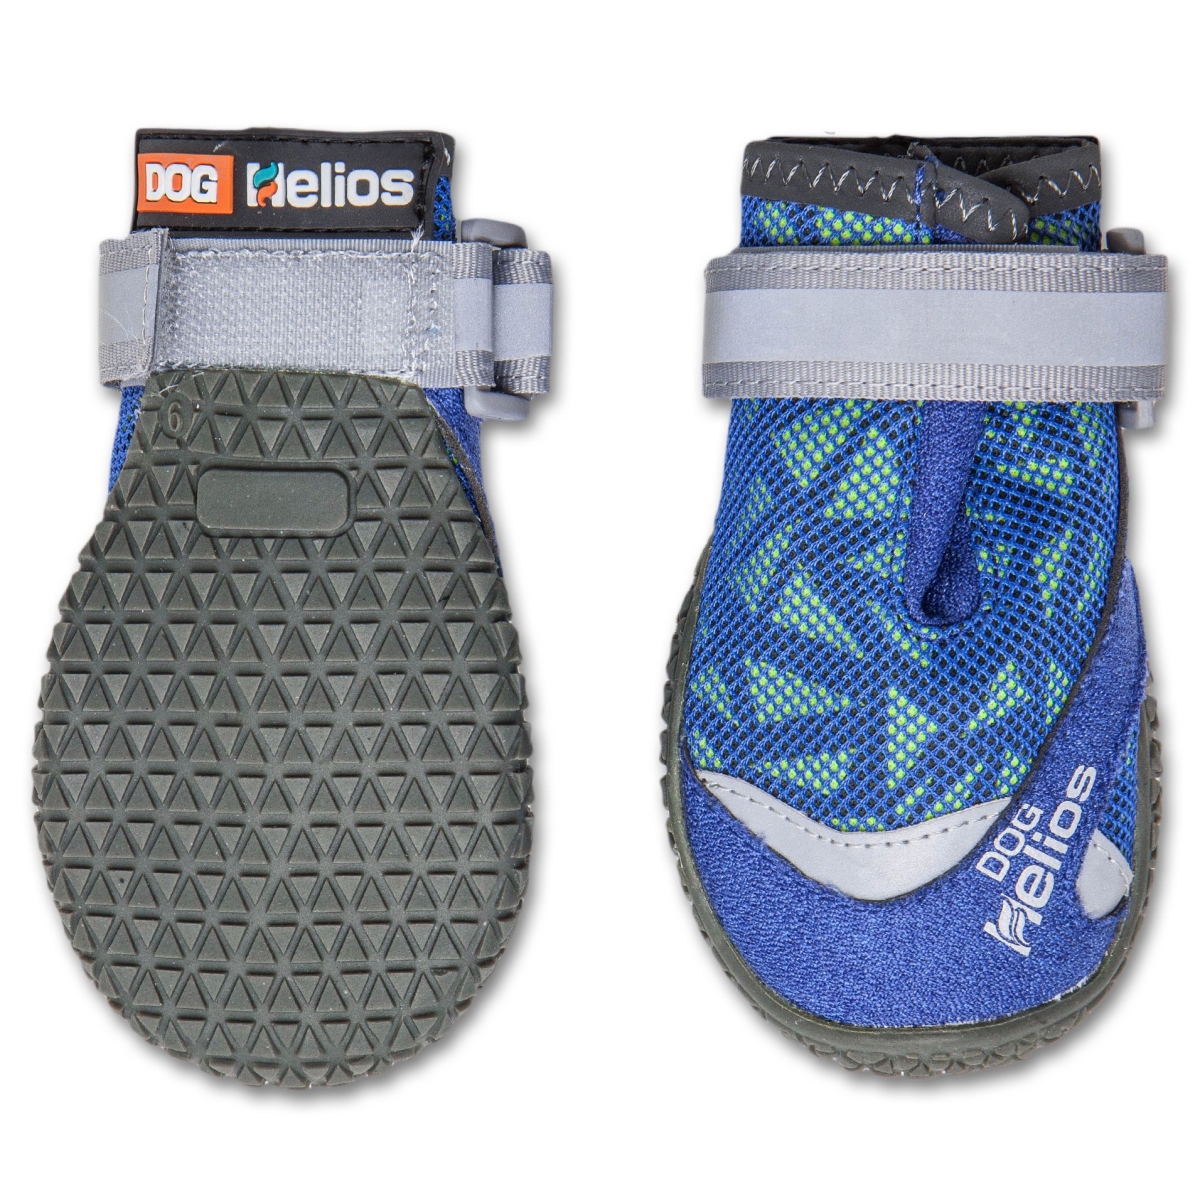 Picture of Dog Helios F17BLXS Surface Premium Grip Performance Dog Shoes - Blue - Extra-Small